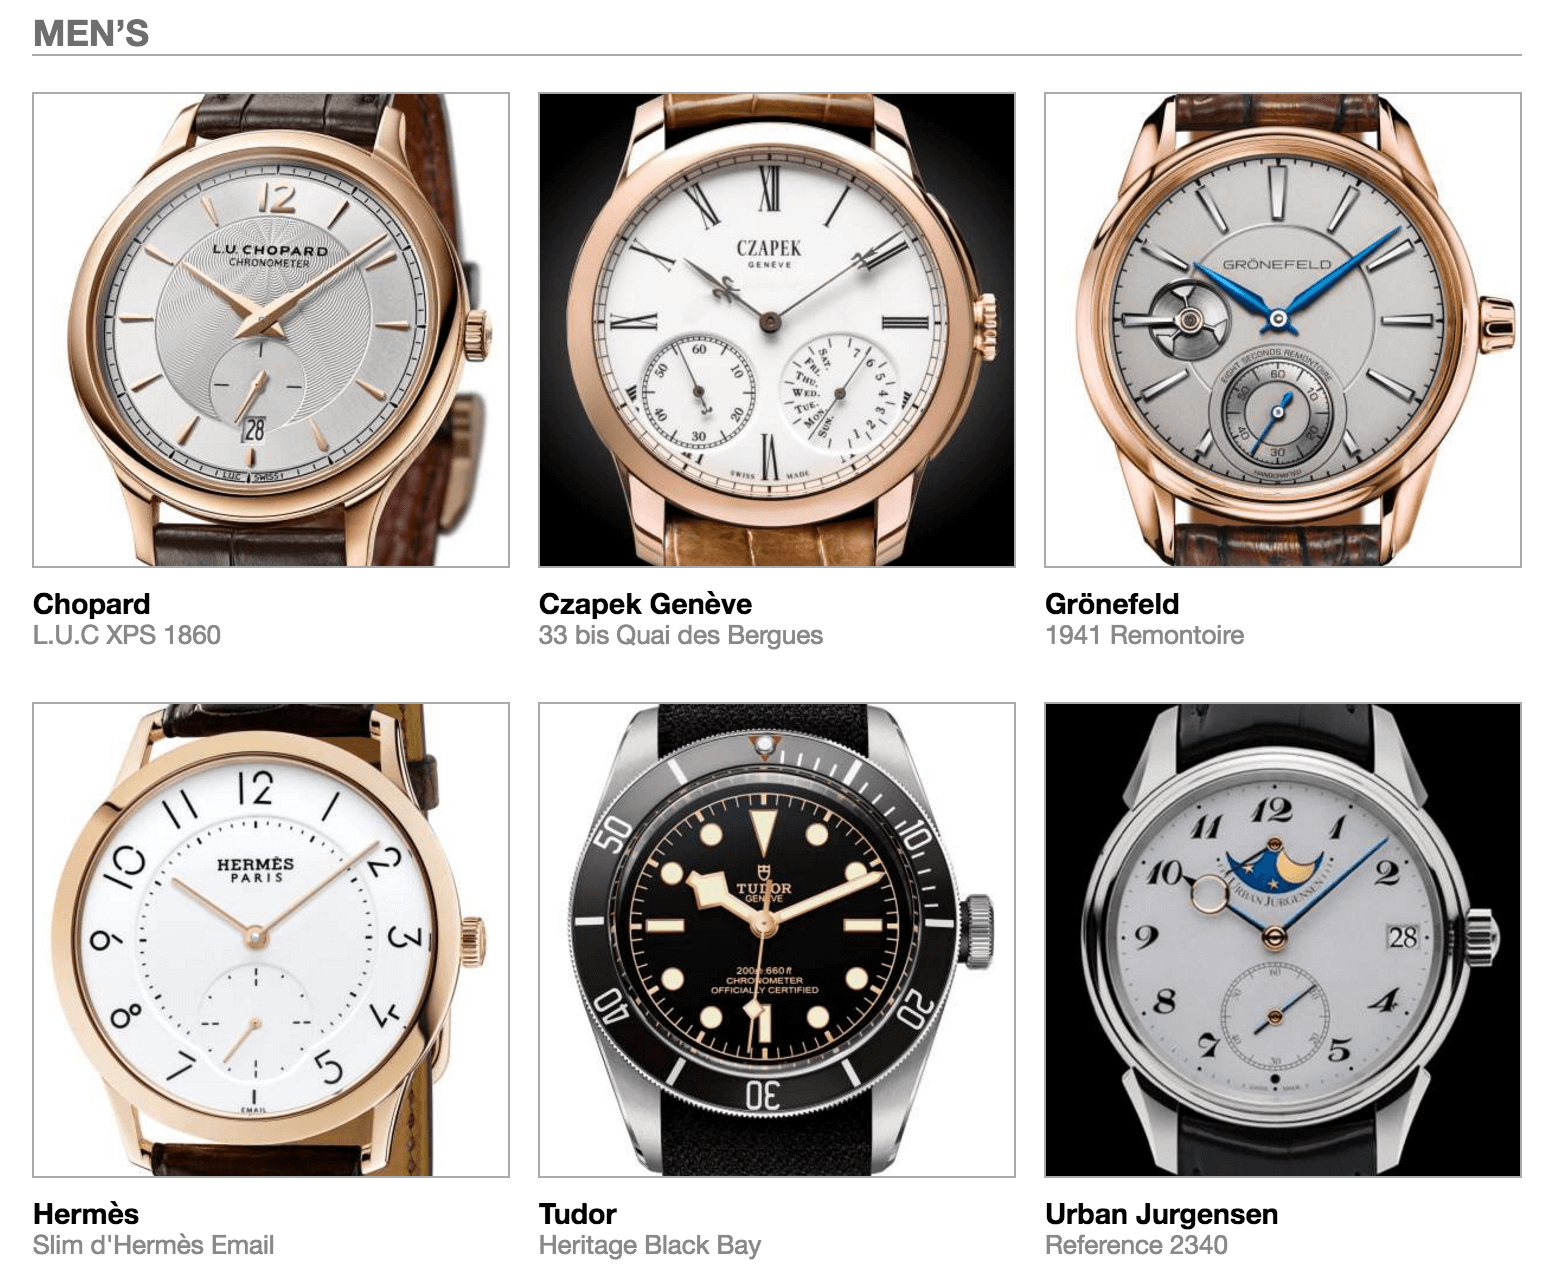 Pre-selected Men's watches in the 2016 GPHG